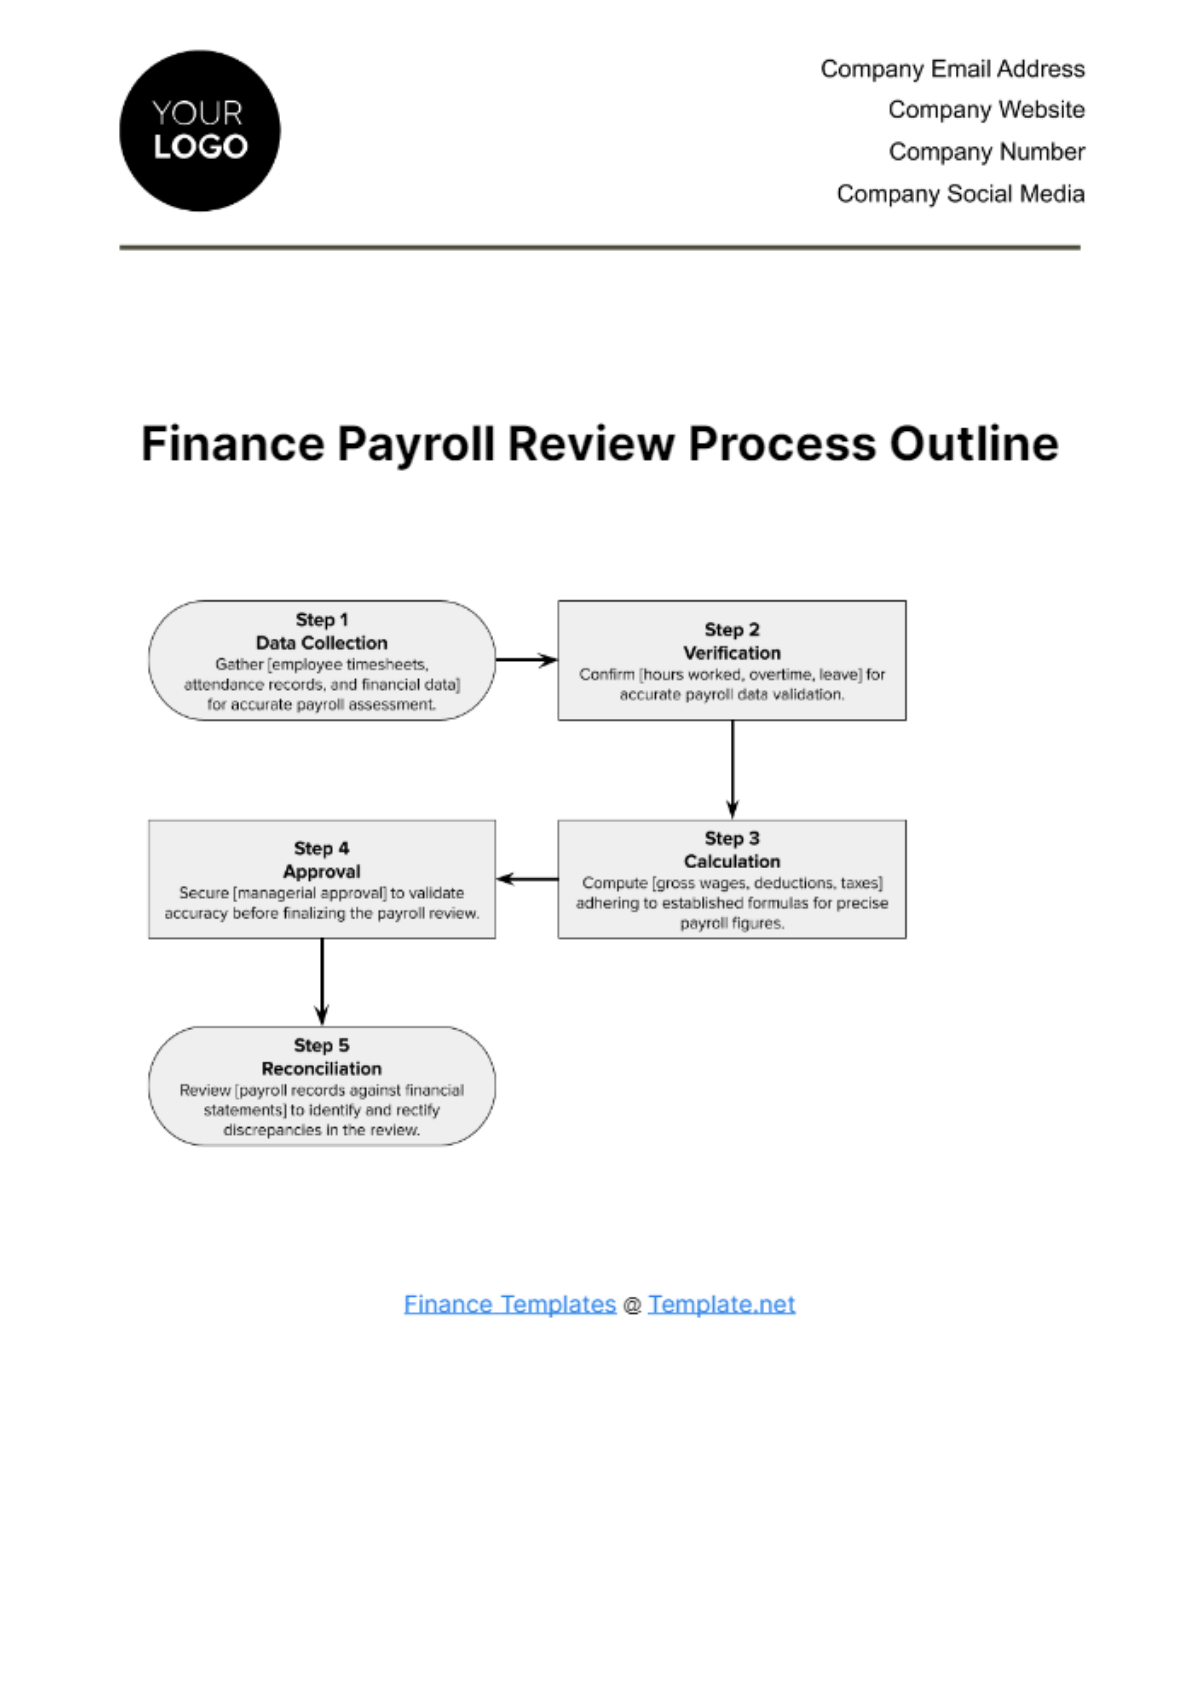 Finance Payroll Review Process Outline Template